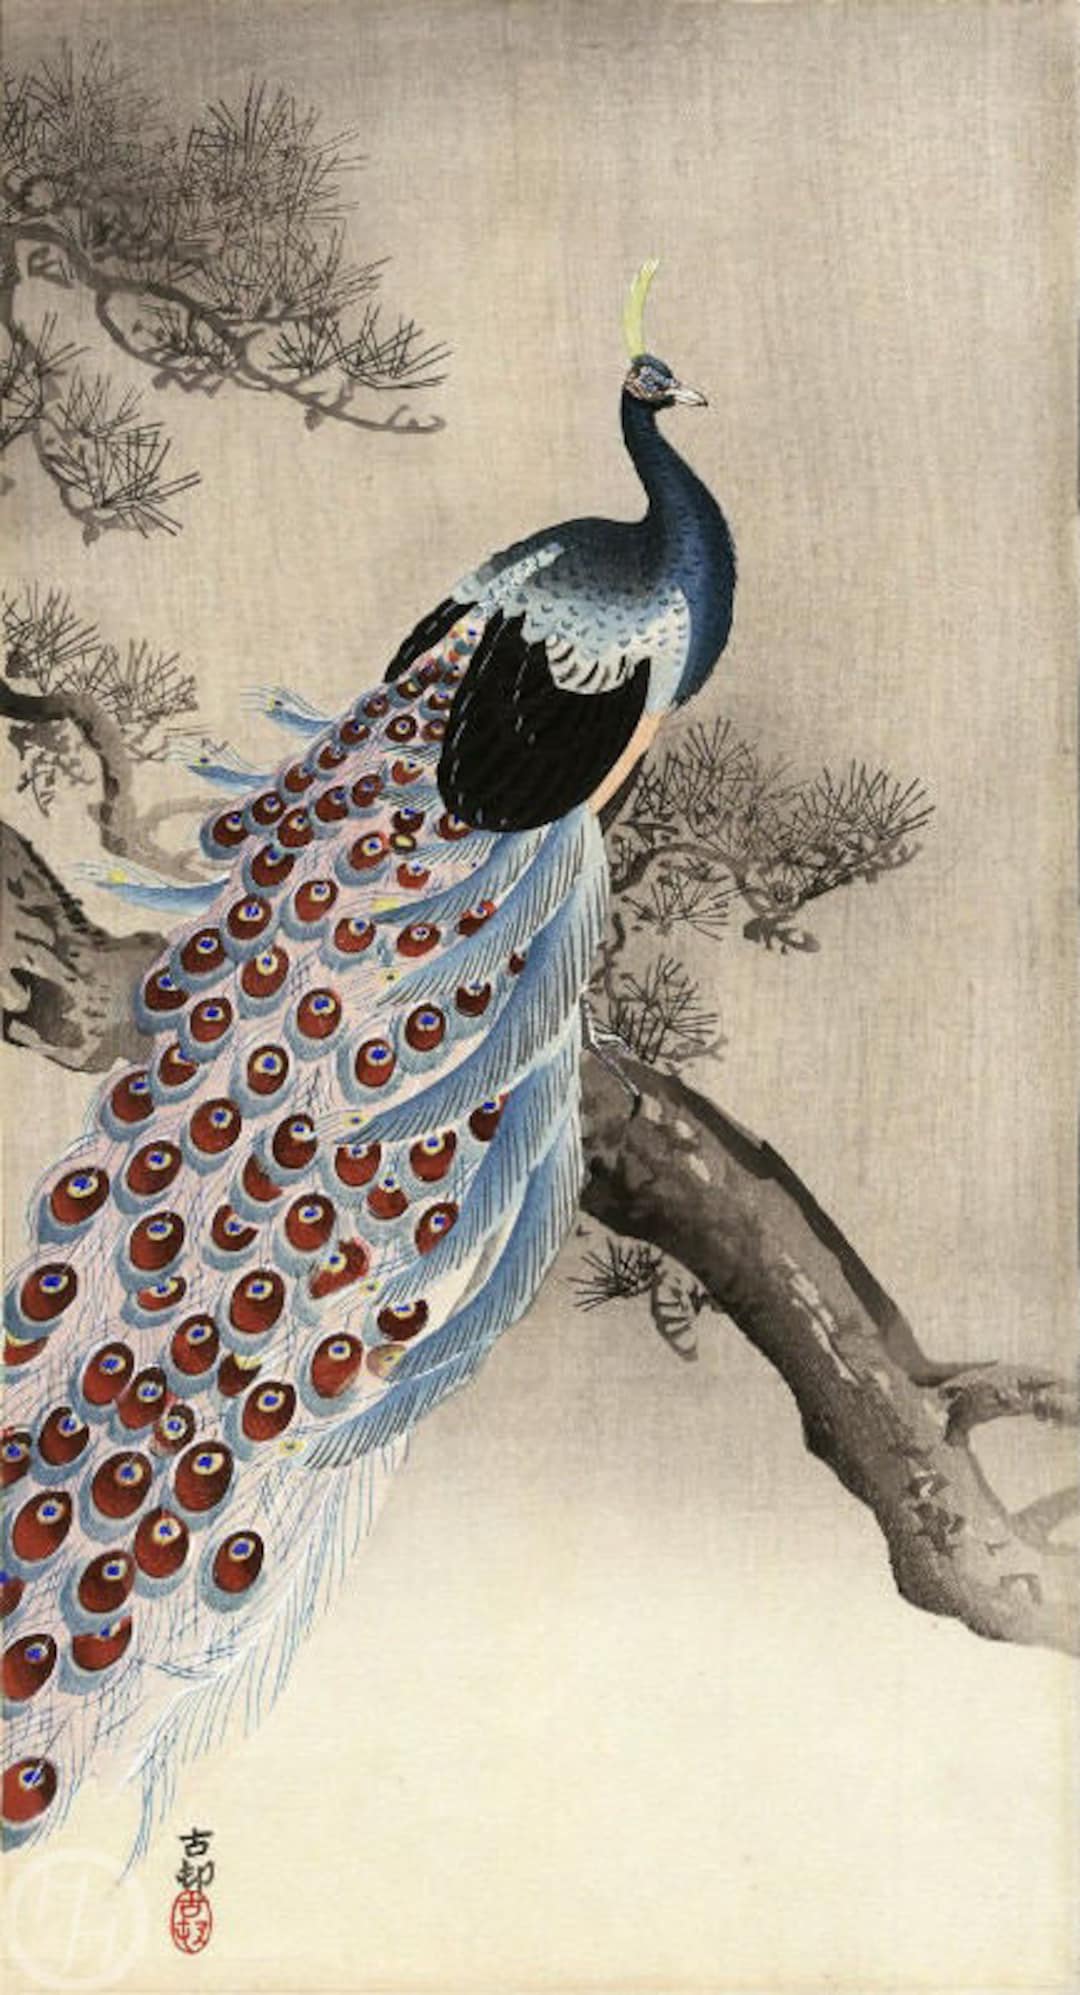 Japanese Art Print peacock on a Bough of a Pine - Etsy